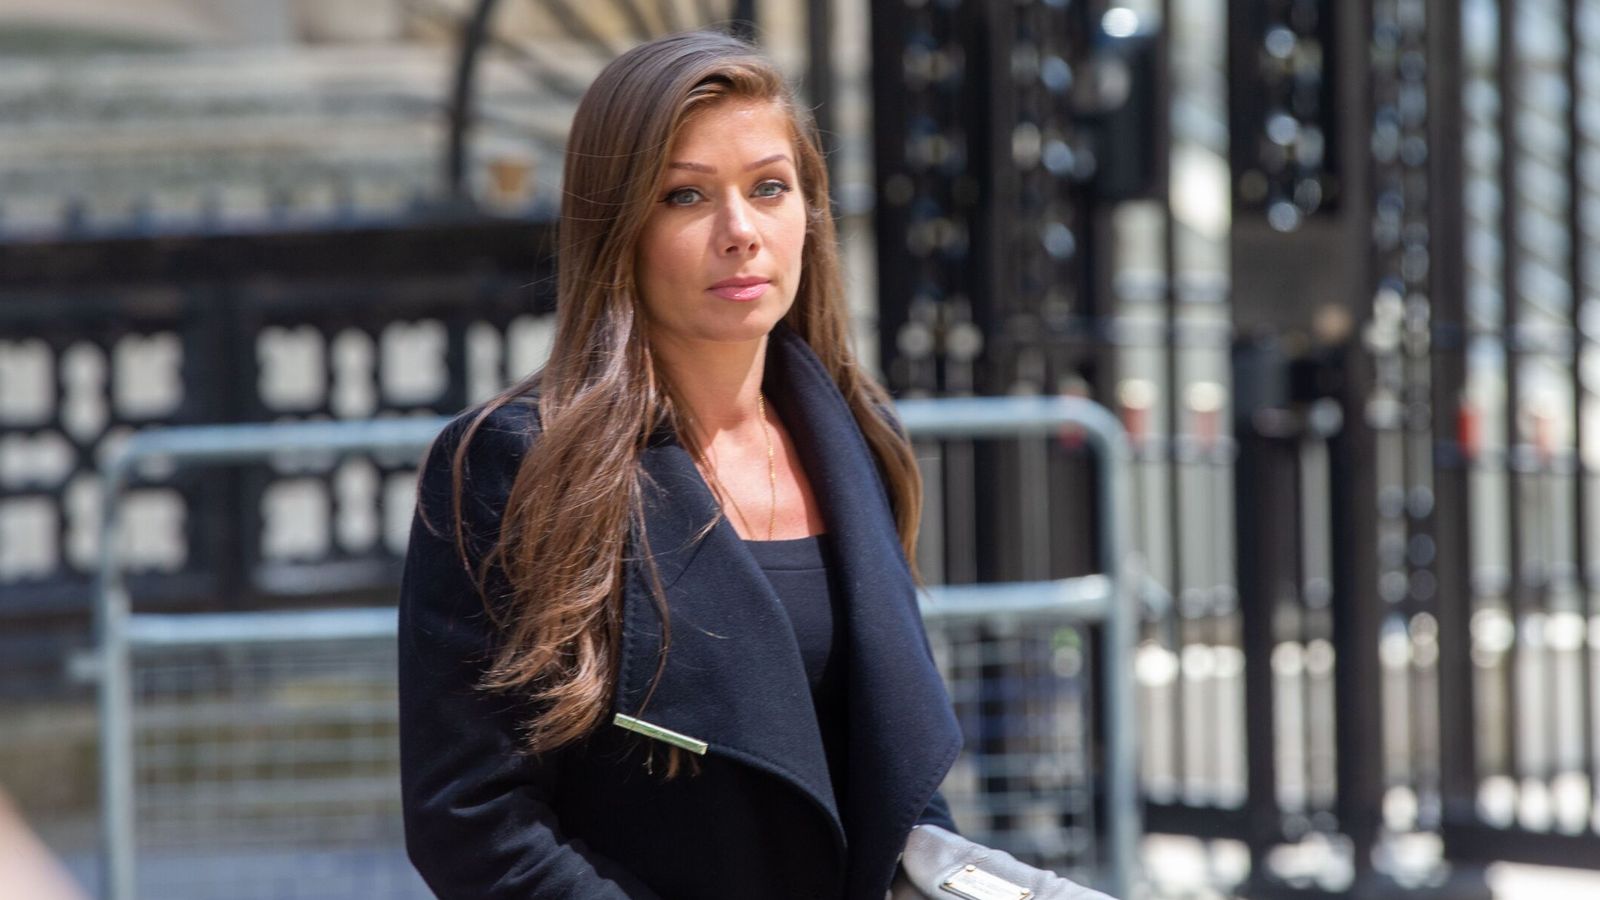 Nikki Sanderson had 'hair set on fire' after tabloids 'painted her as promiscuous', Prince Harry hacking trial told